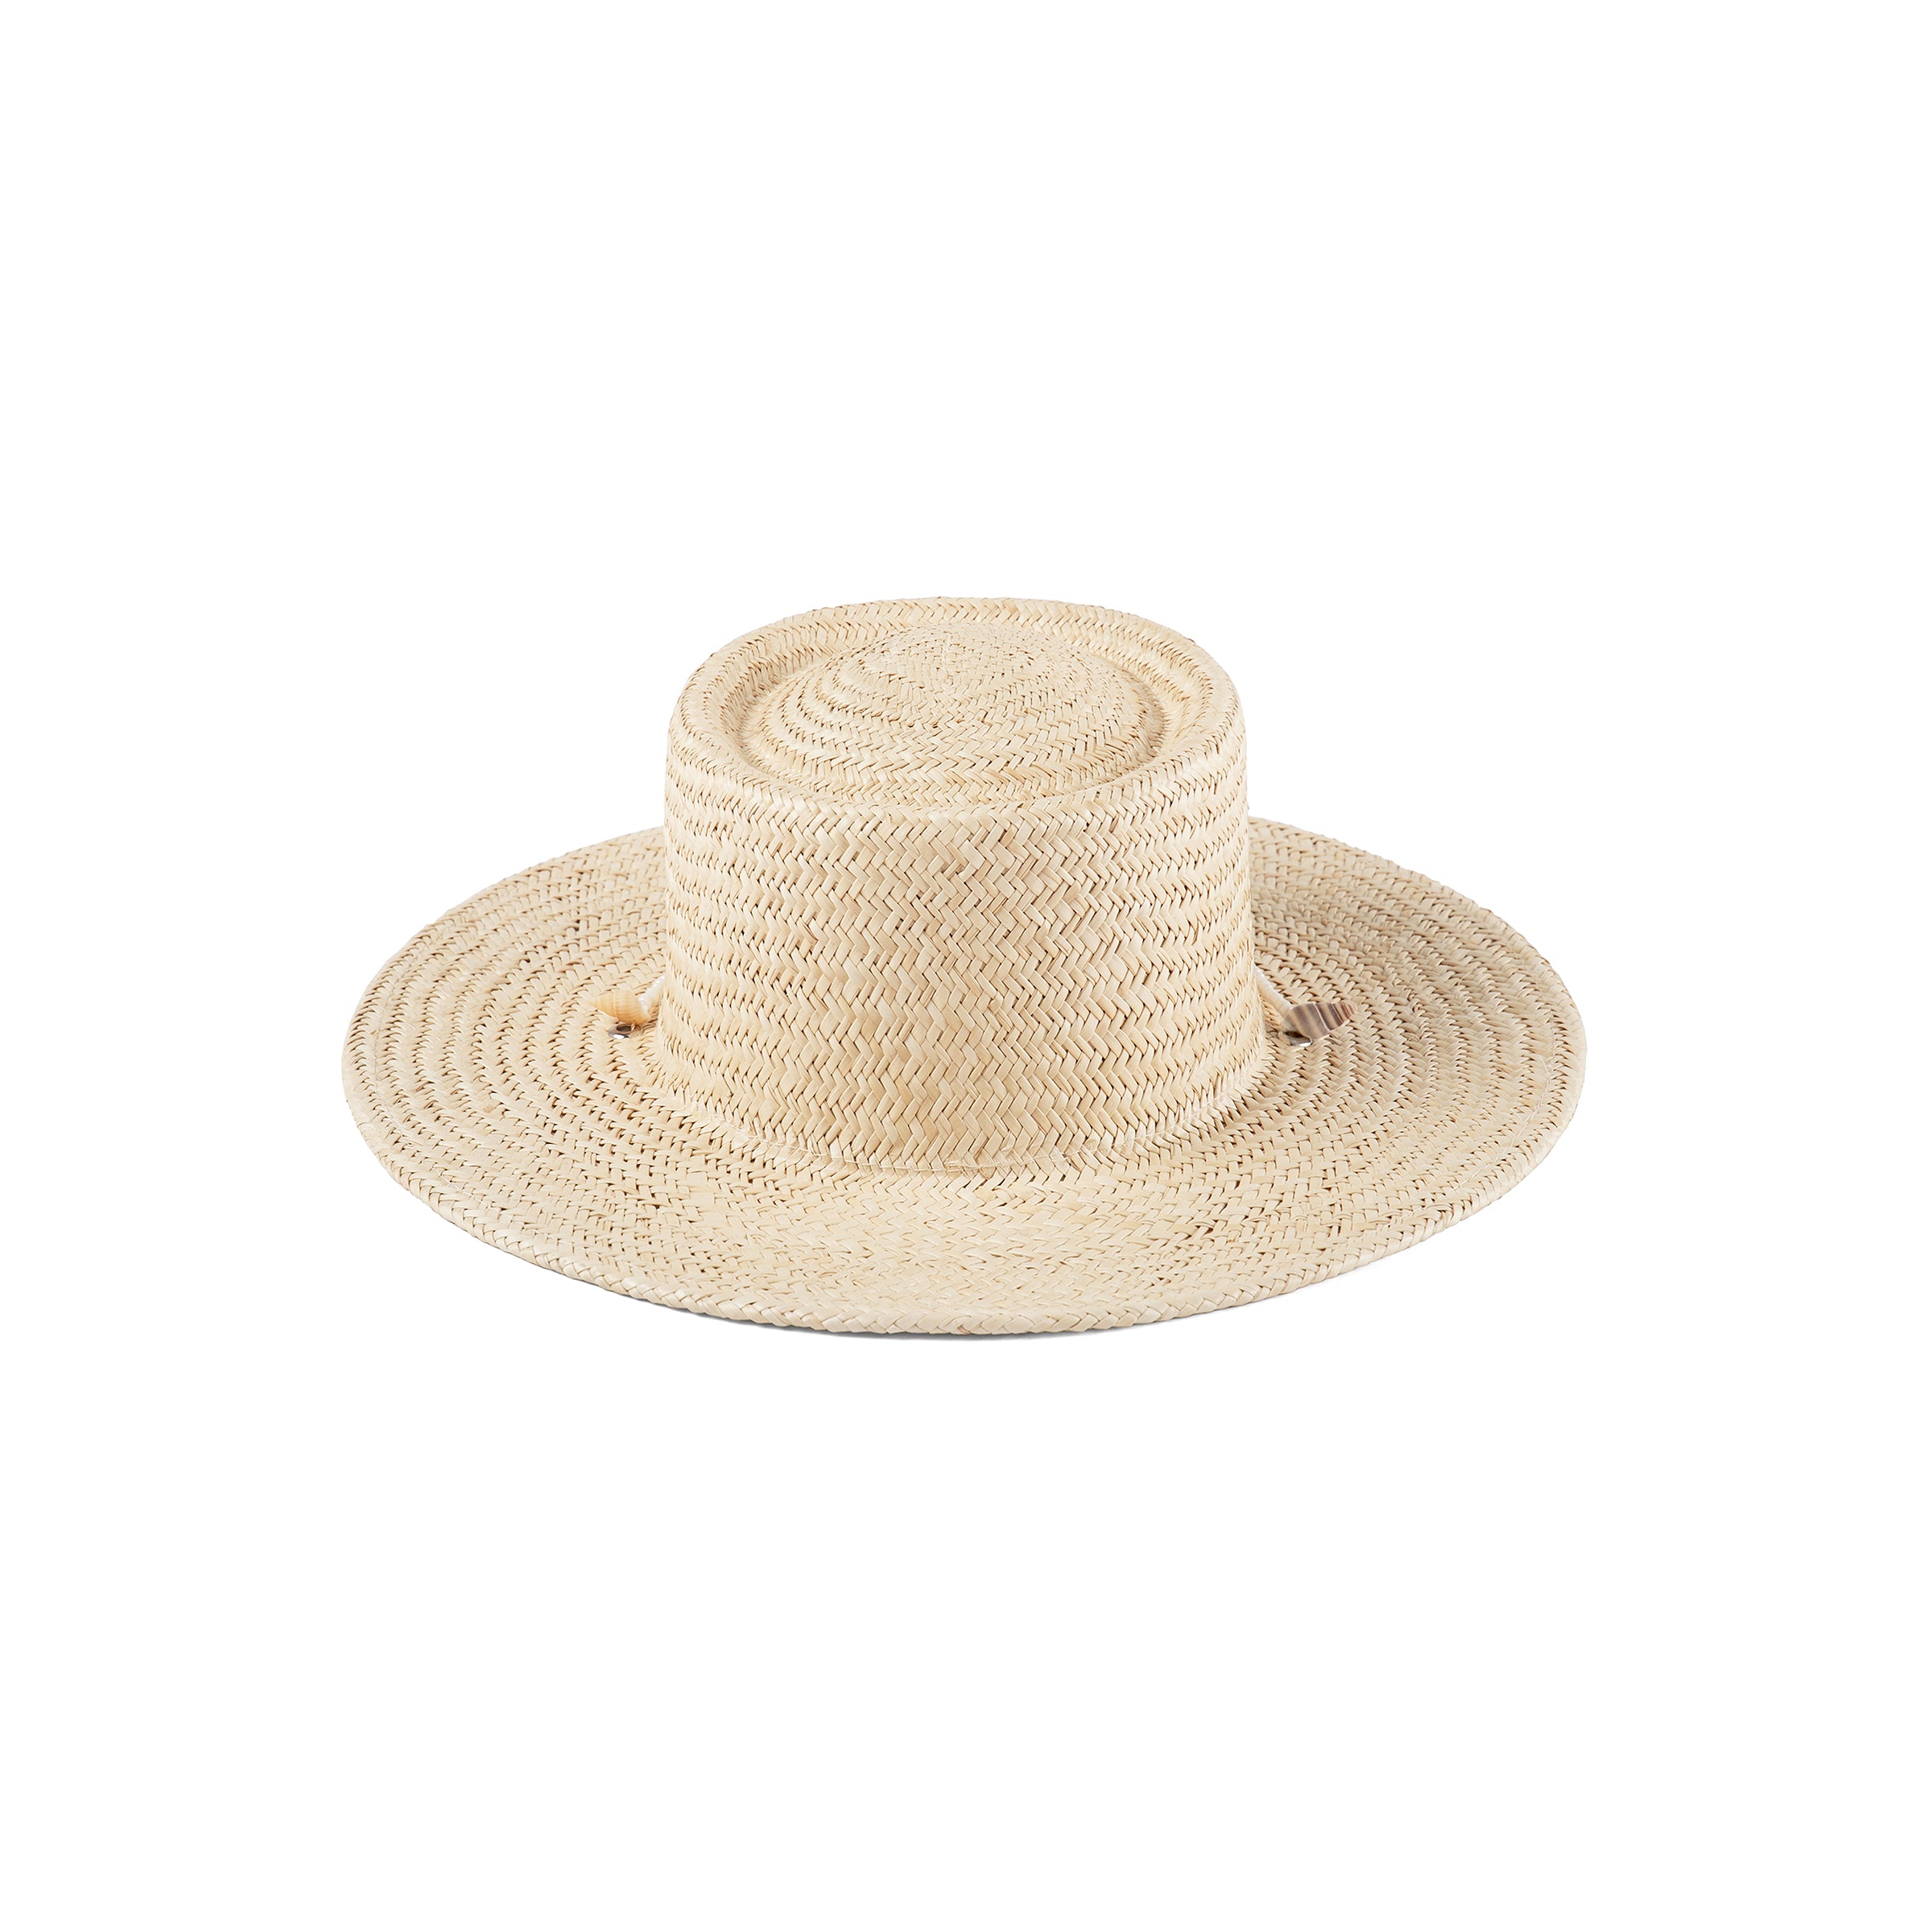 Seashells Boater - Straw Boater Hat in Natural | Lack of Color US